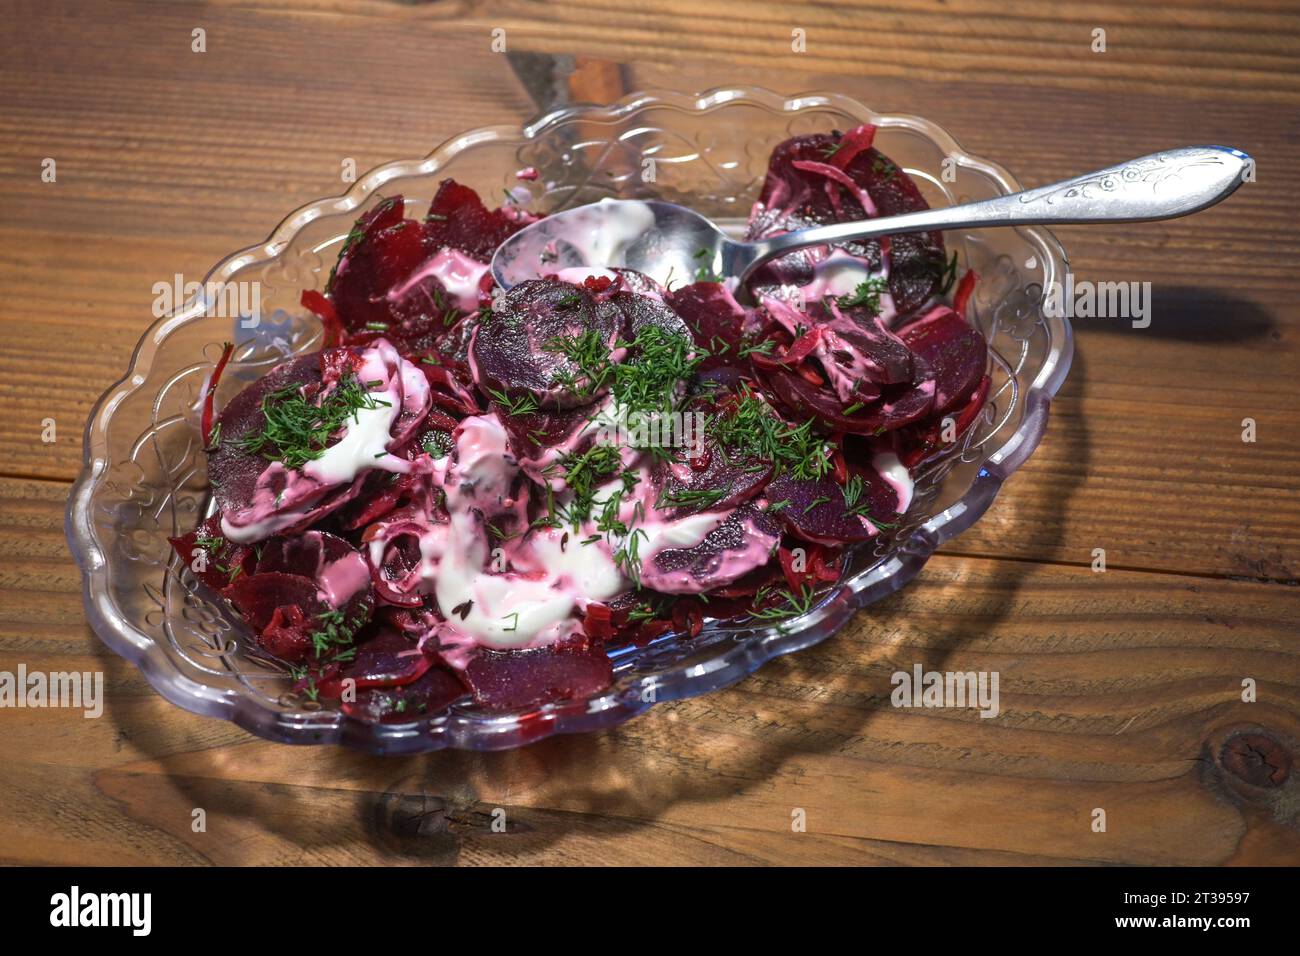 Beetroot salad with dill and a creamy dressing, healthy vegetarian dish in a glass bowl on a rustic wooden table, selected focus, narrow depth of fiel Stock Photo